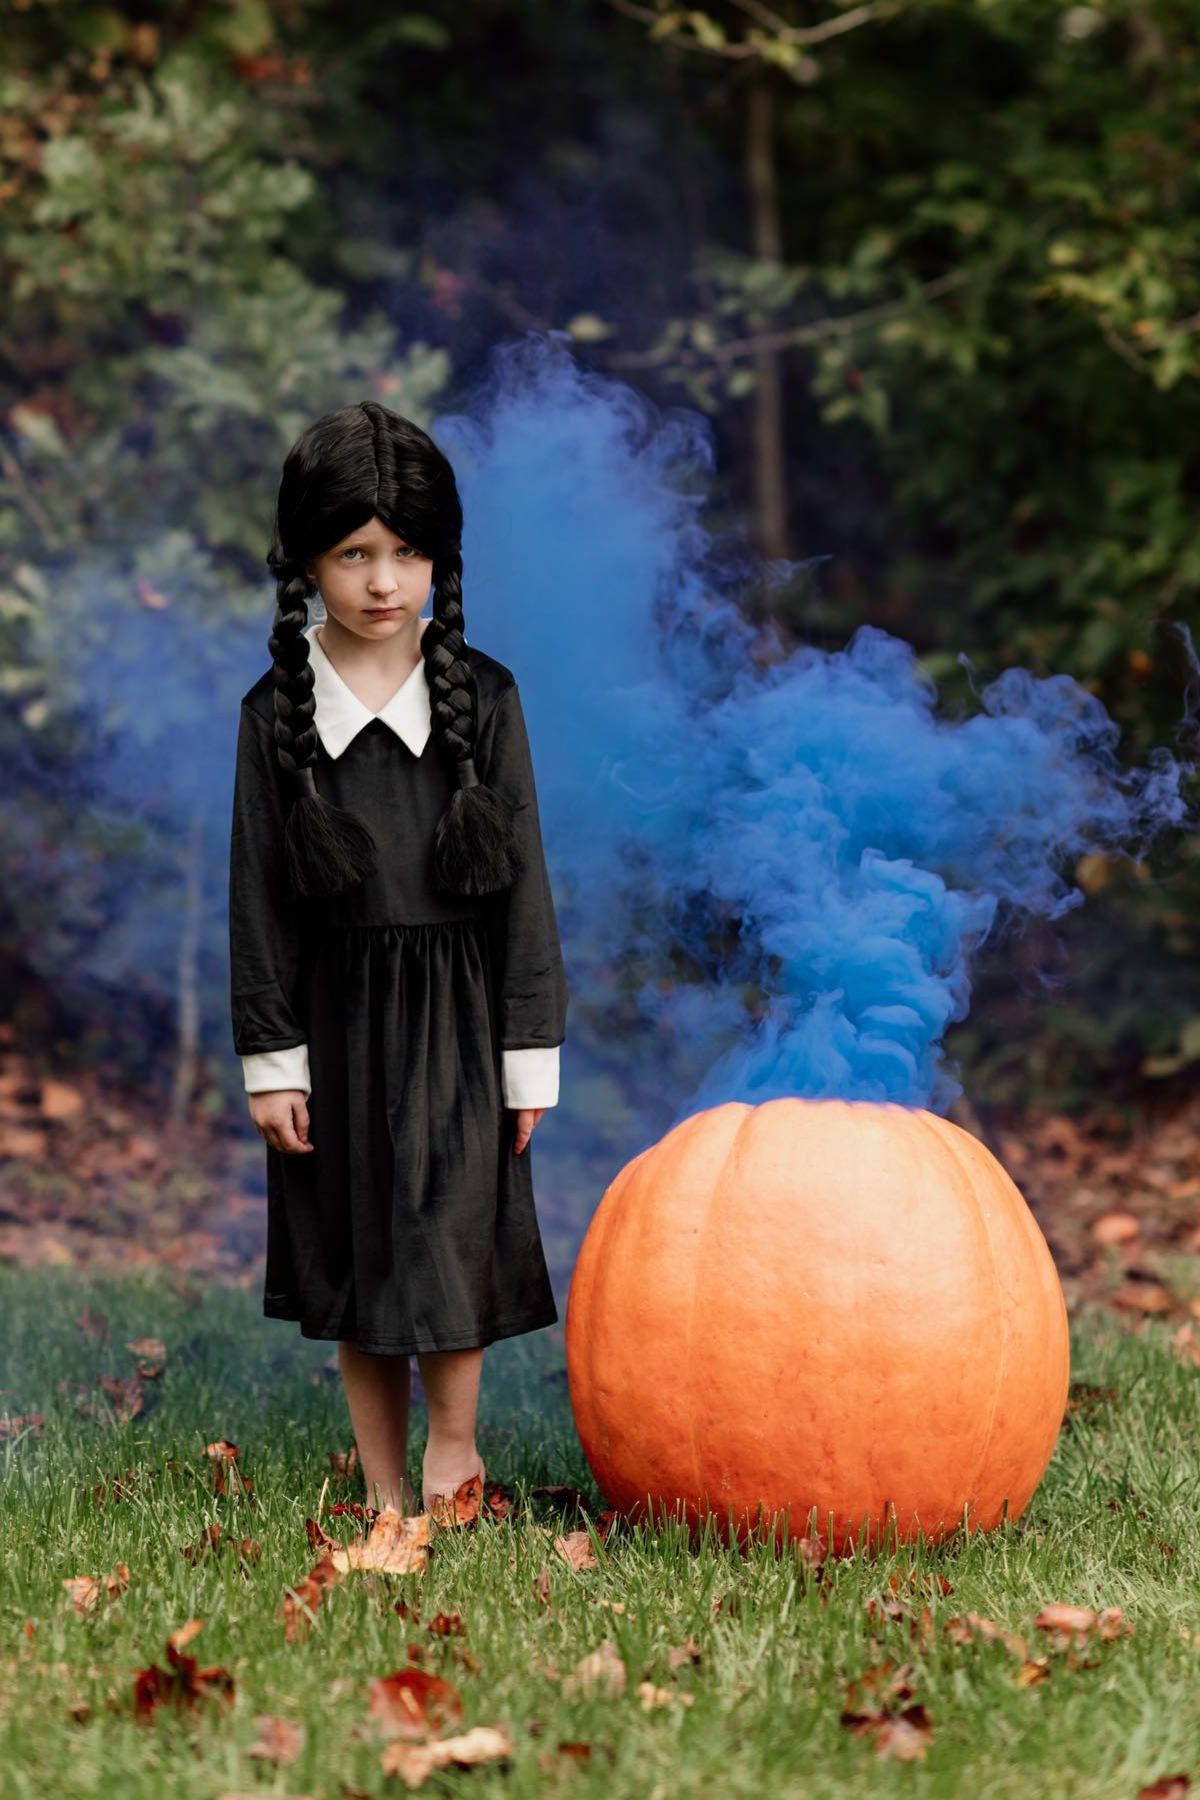 A girl dressed as Wednesday Adams from the Adam's Family next to a pumpkin with blue smoke coming out of it.